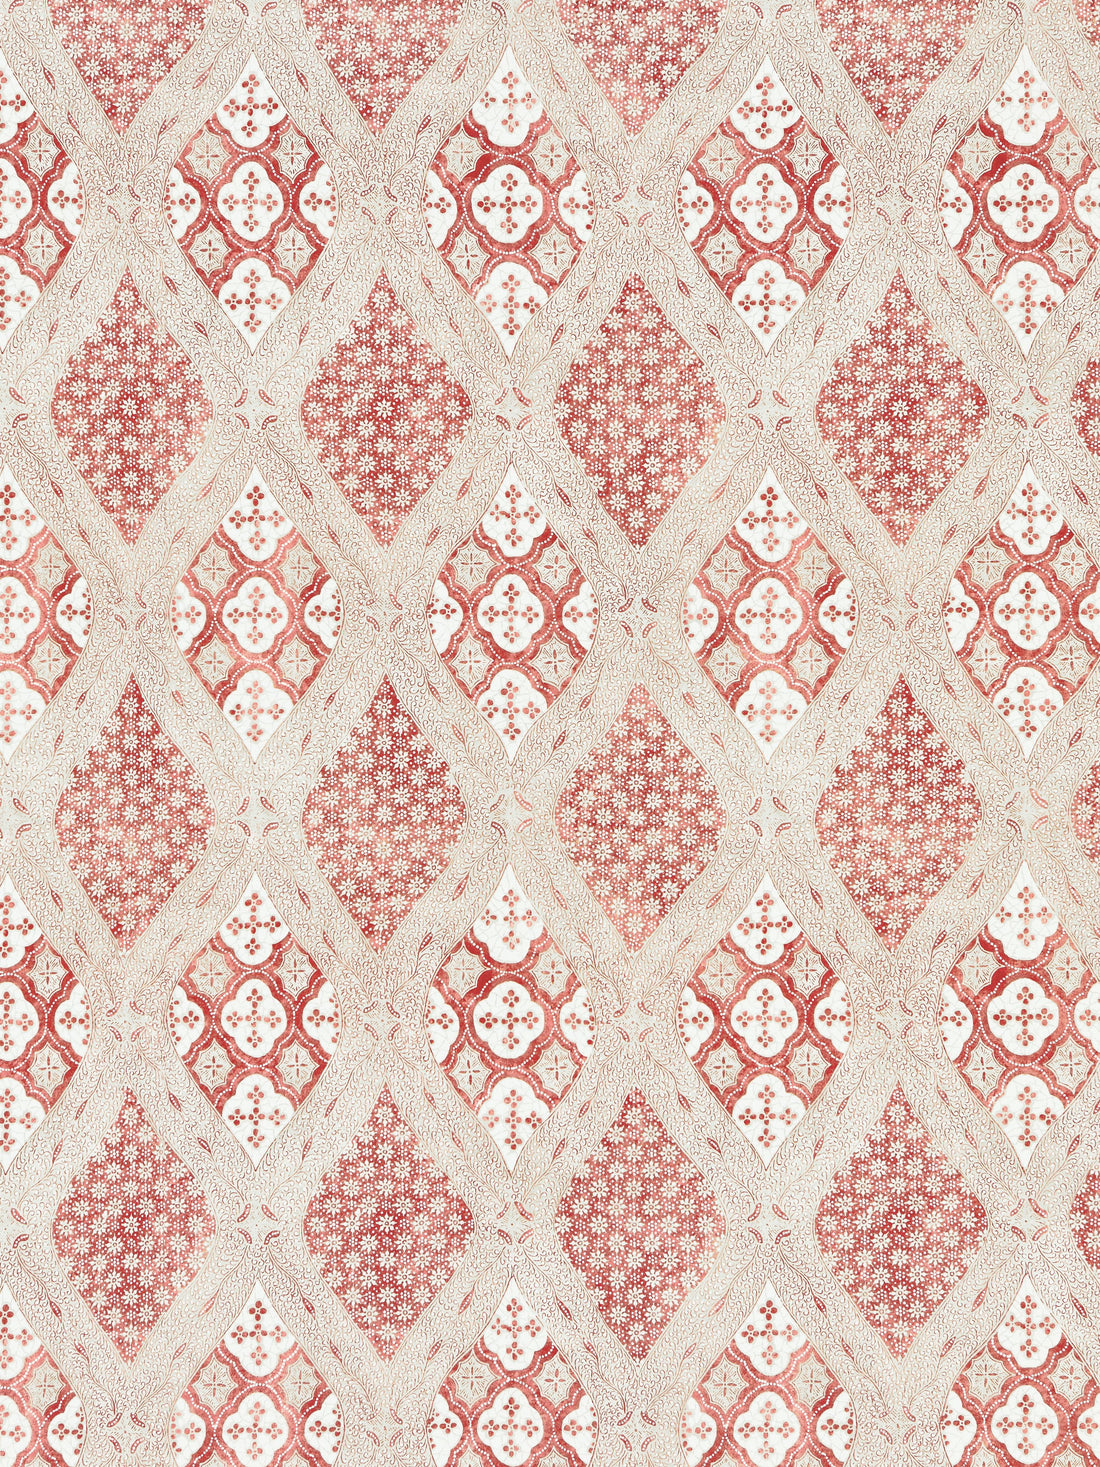 Farrah Print fabric in coral spice color - pattern number SC 000216626 - by Scalamandre in the Scalamandre Fabrics Book 1 collection